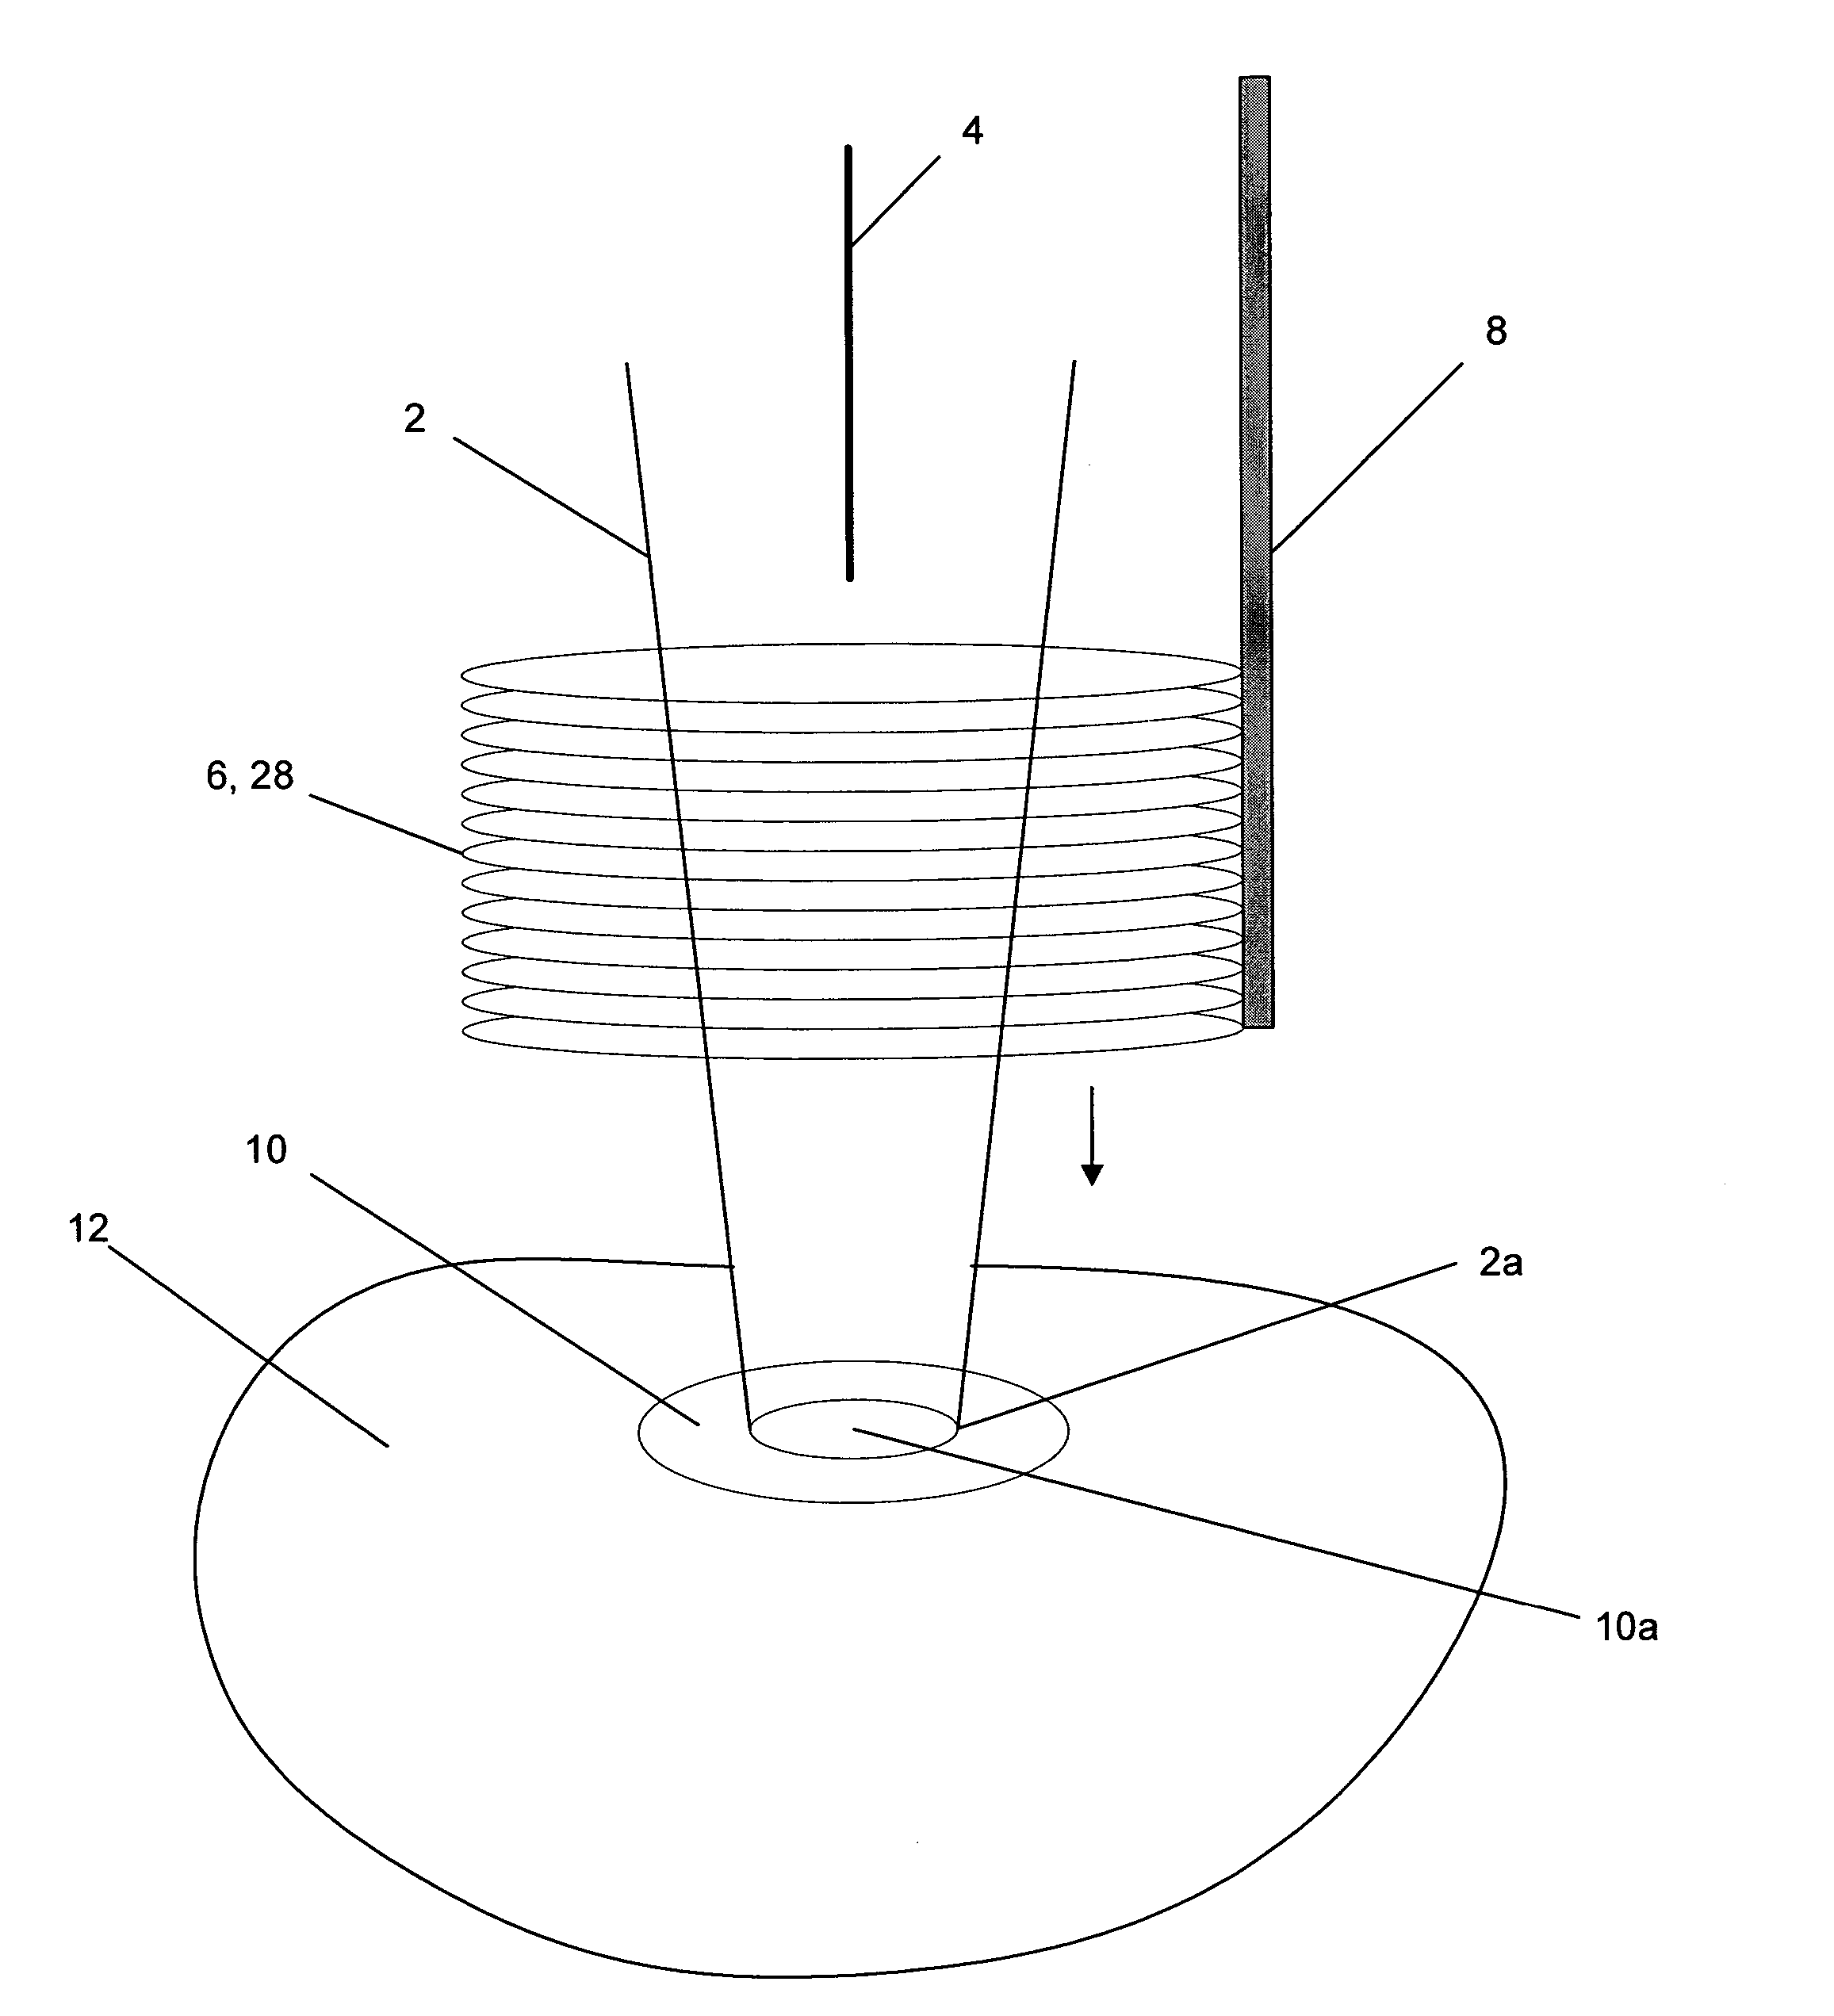 Fast perfusion system and patch clamp technique utilizing an interface chamber system having high throughput and low volume requirements